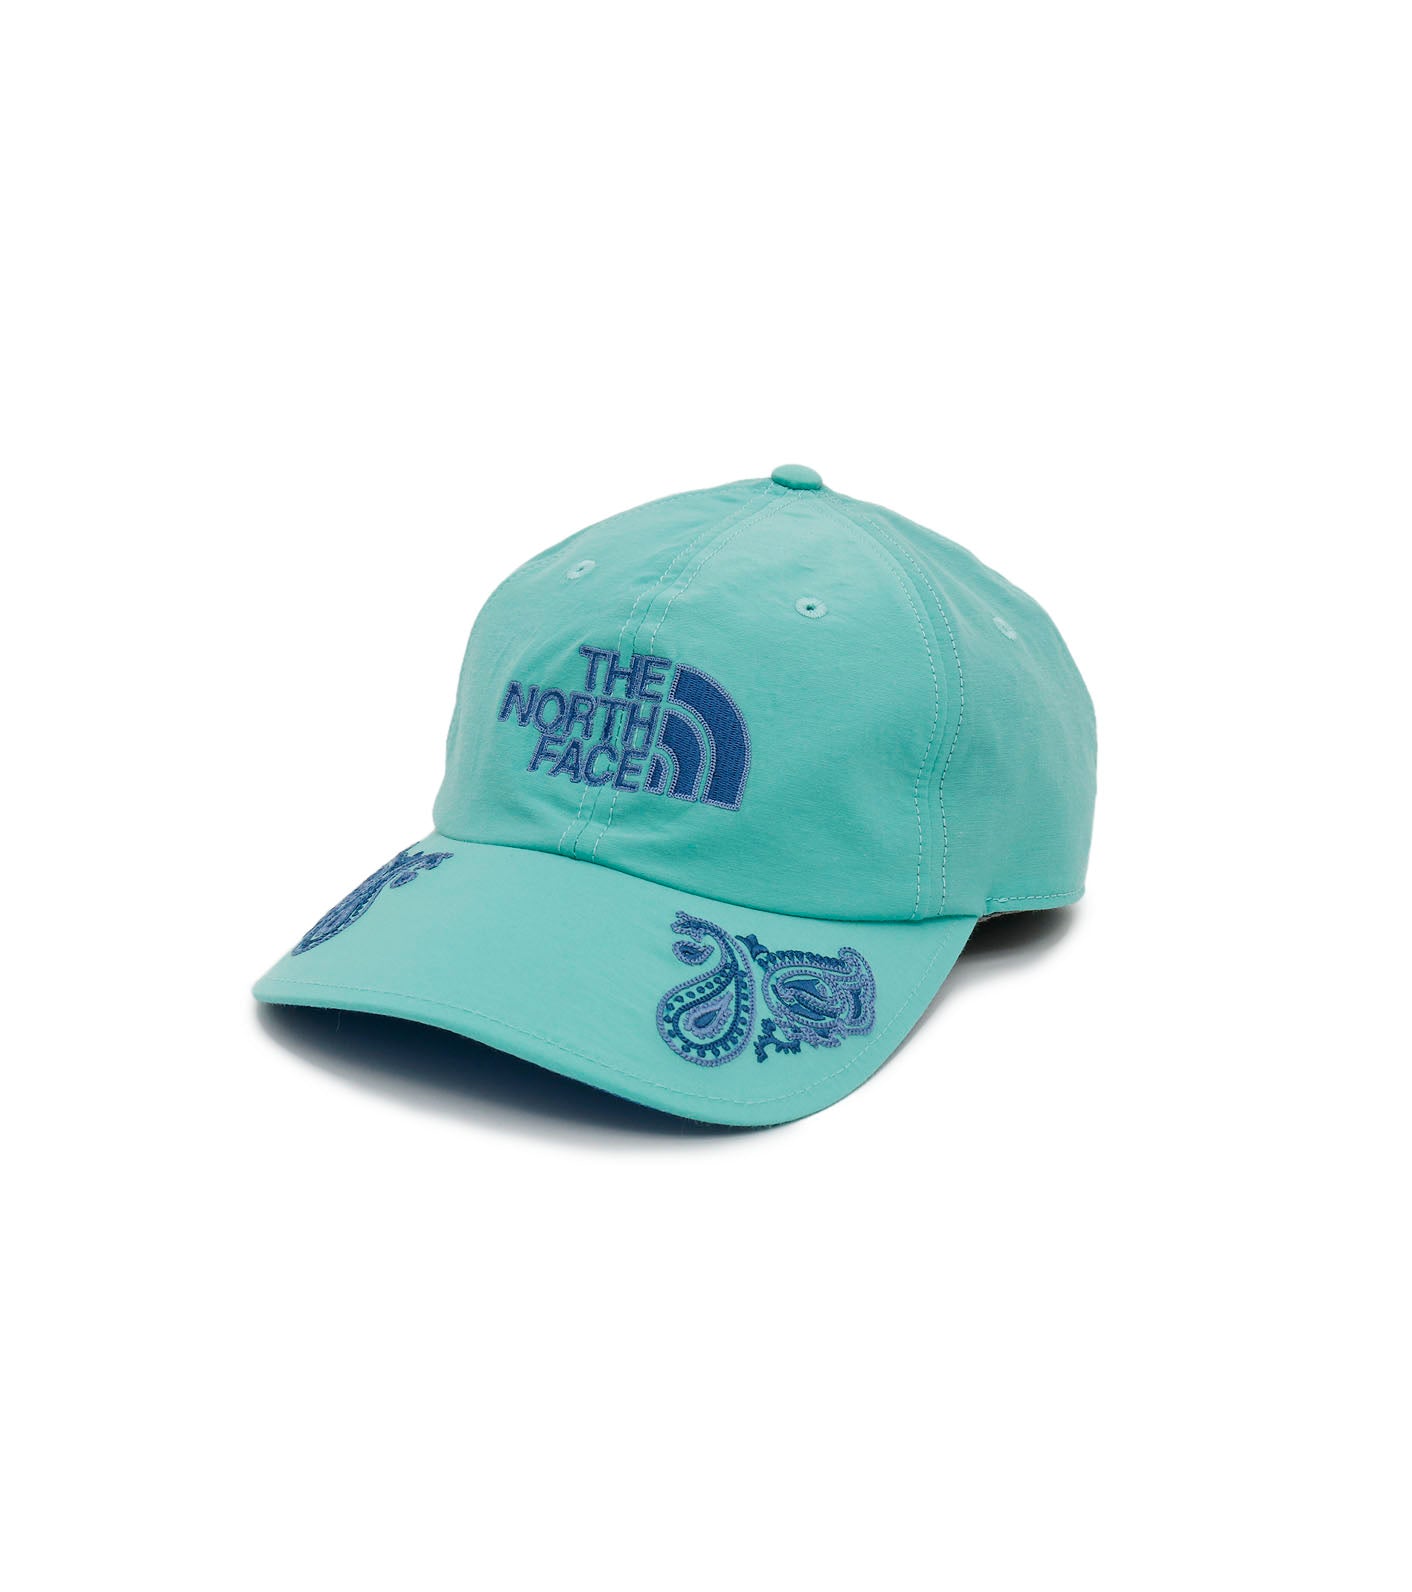 THE NORTH FACE PURPLE LABEL Field Embroidered Graphic Cap